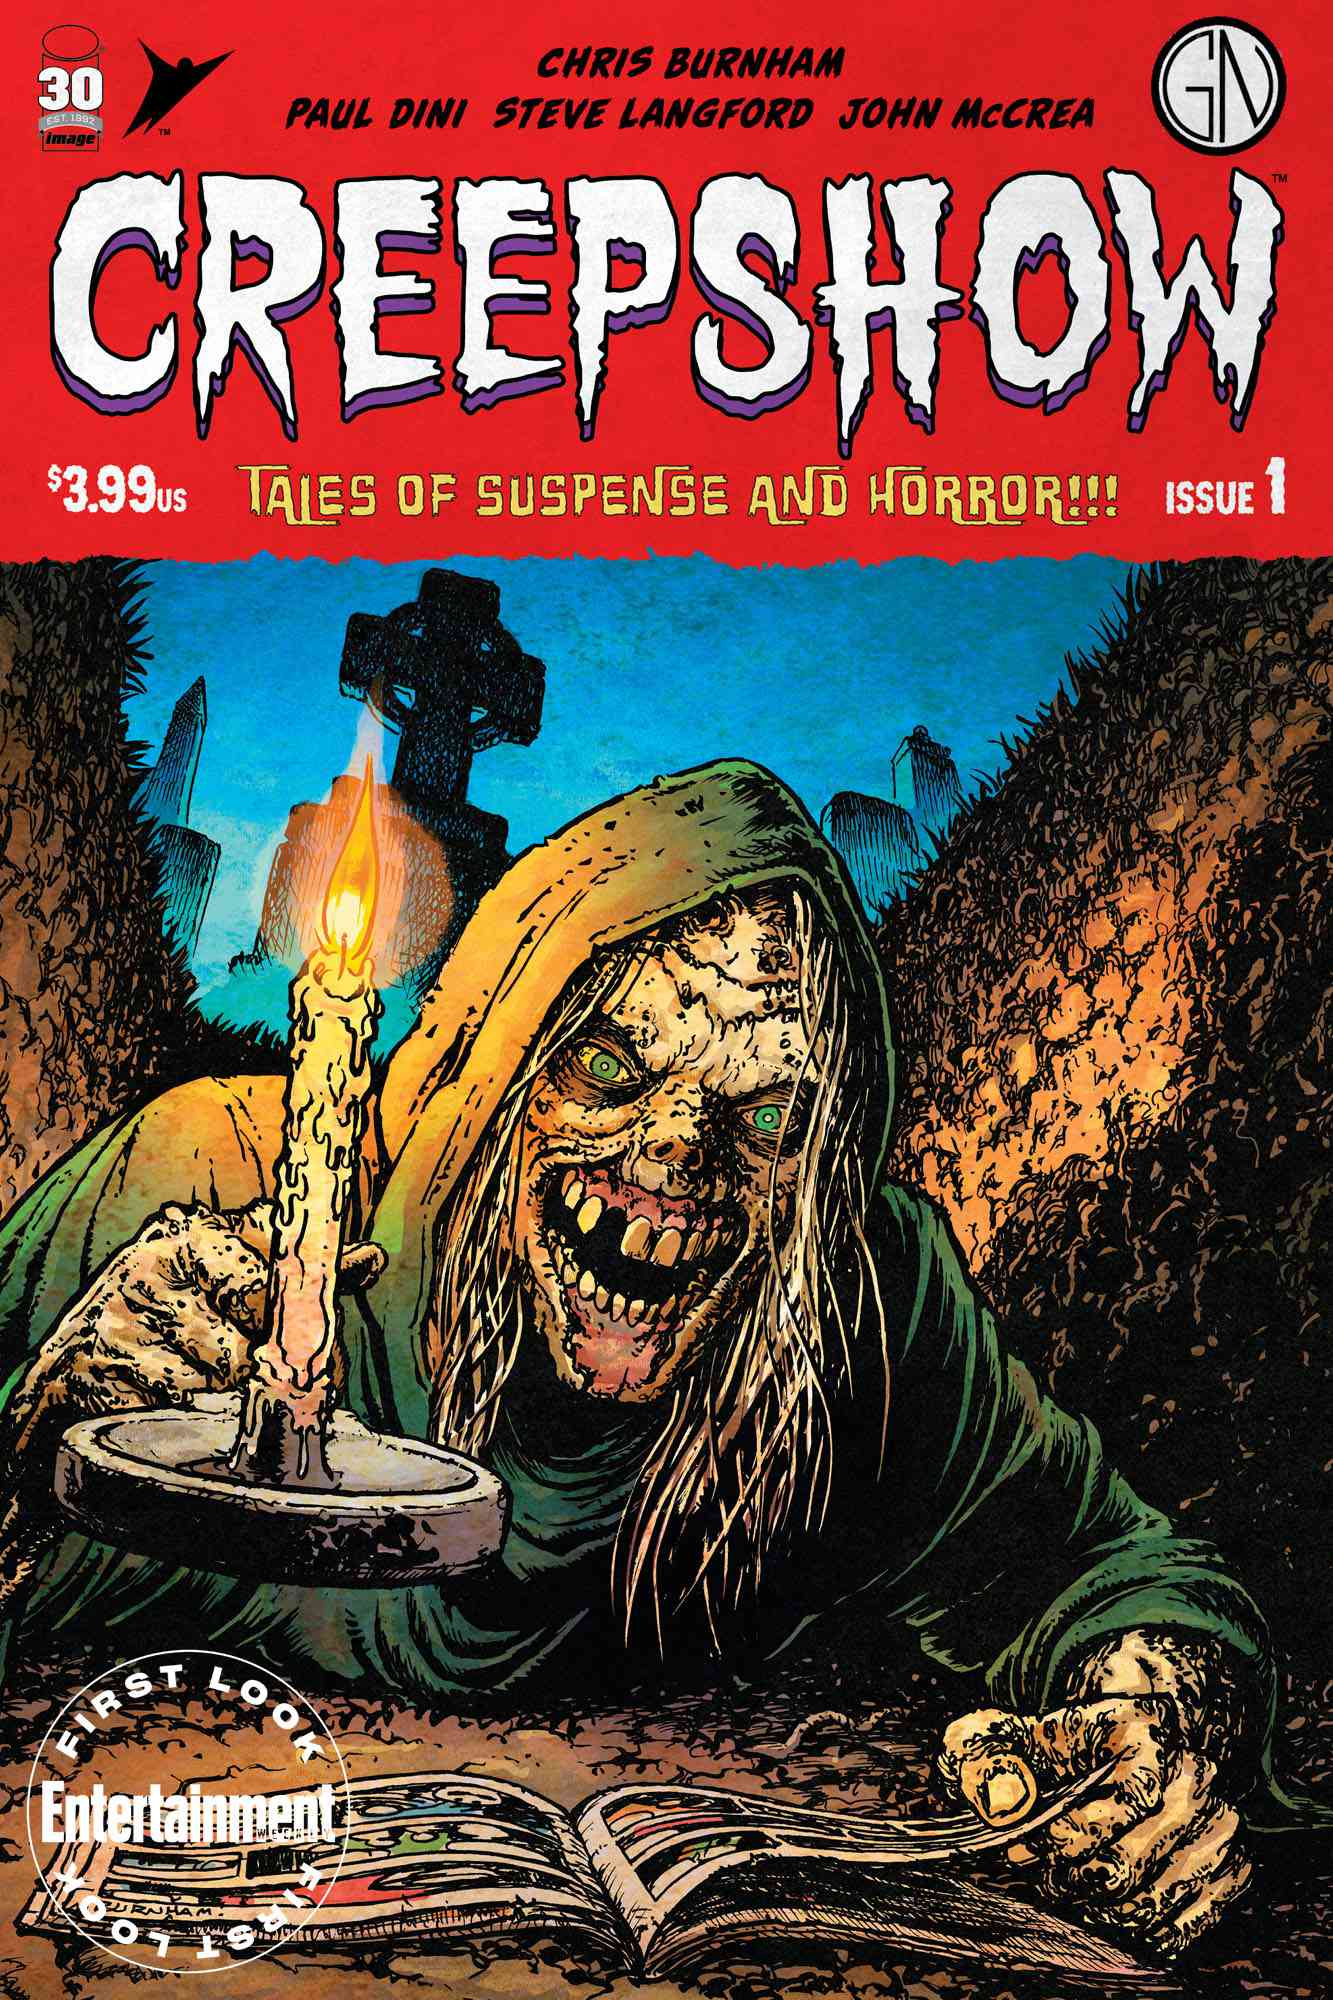 Chill your bones with a first look at the new Creepshow comic